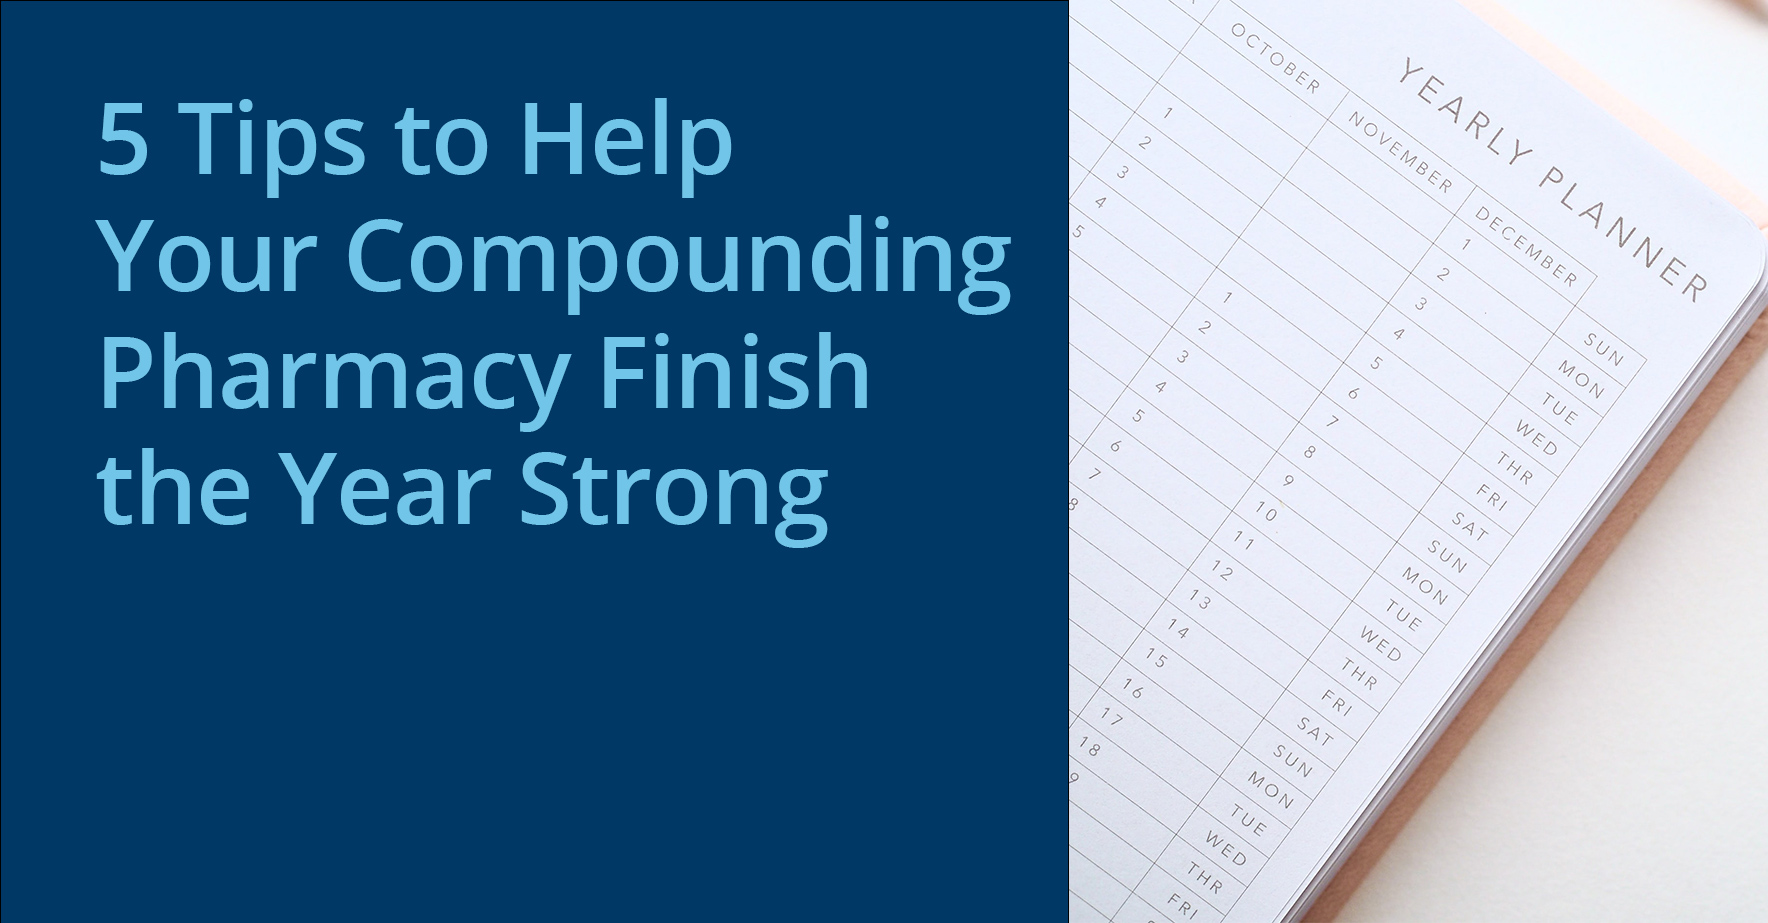 5 _tips_to_help_your_compounding_pharmacy_finish_the_year_strong.jpg